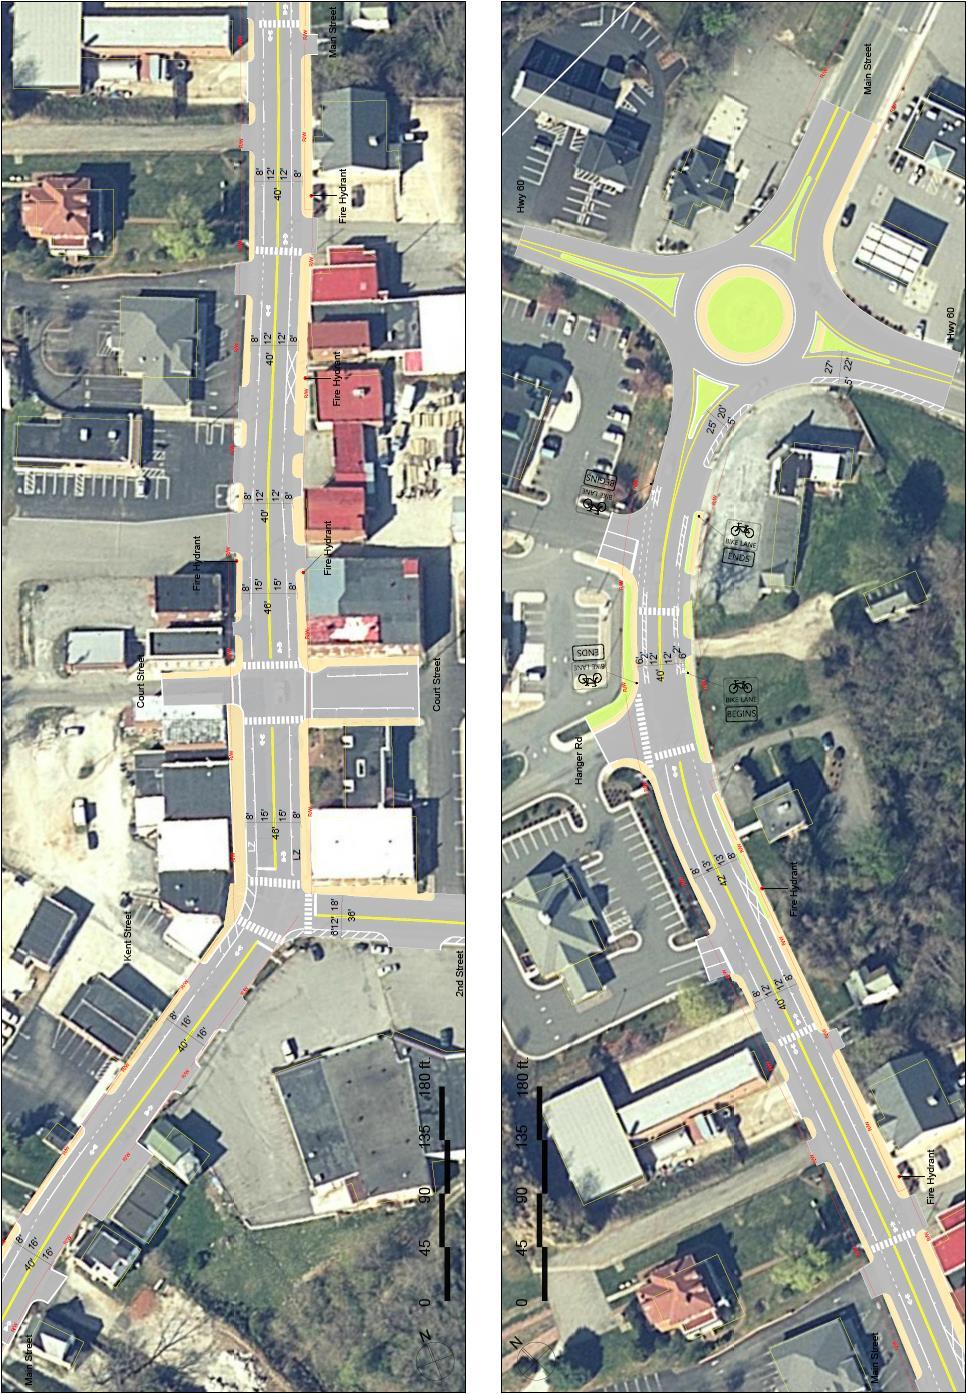 Downtown Amherst Recommended Improvements Phase 1: Pedestrian signalization improvements to the intersection of 2 nd St and Main St (completed during study phase) and sidewalk ramp improvements along